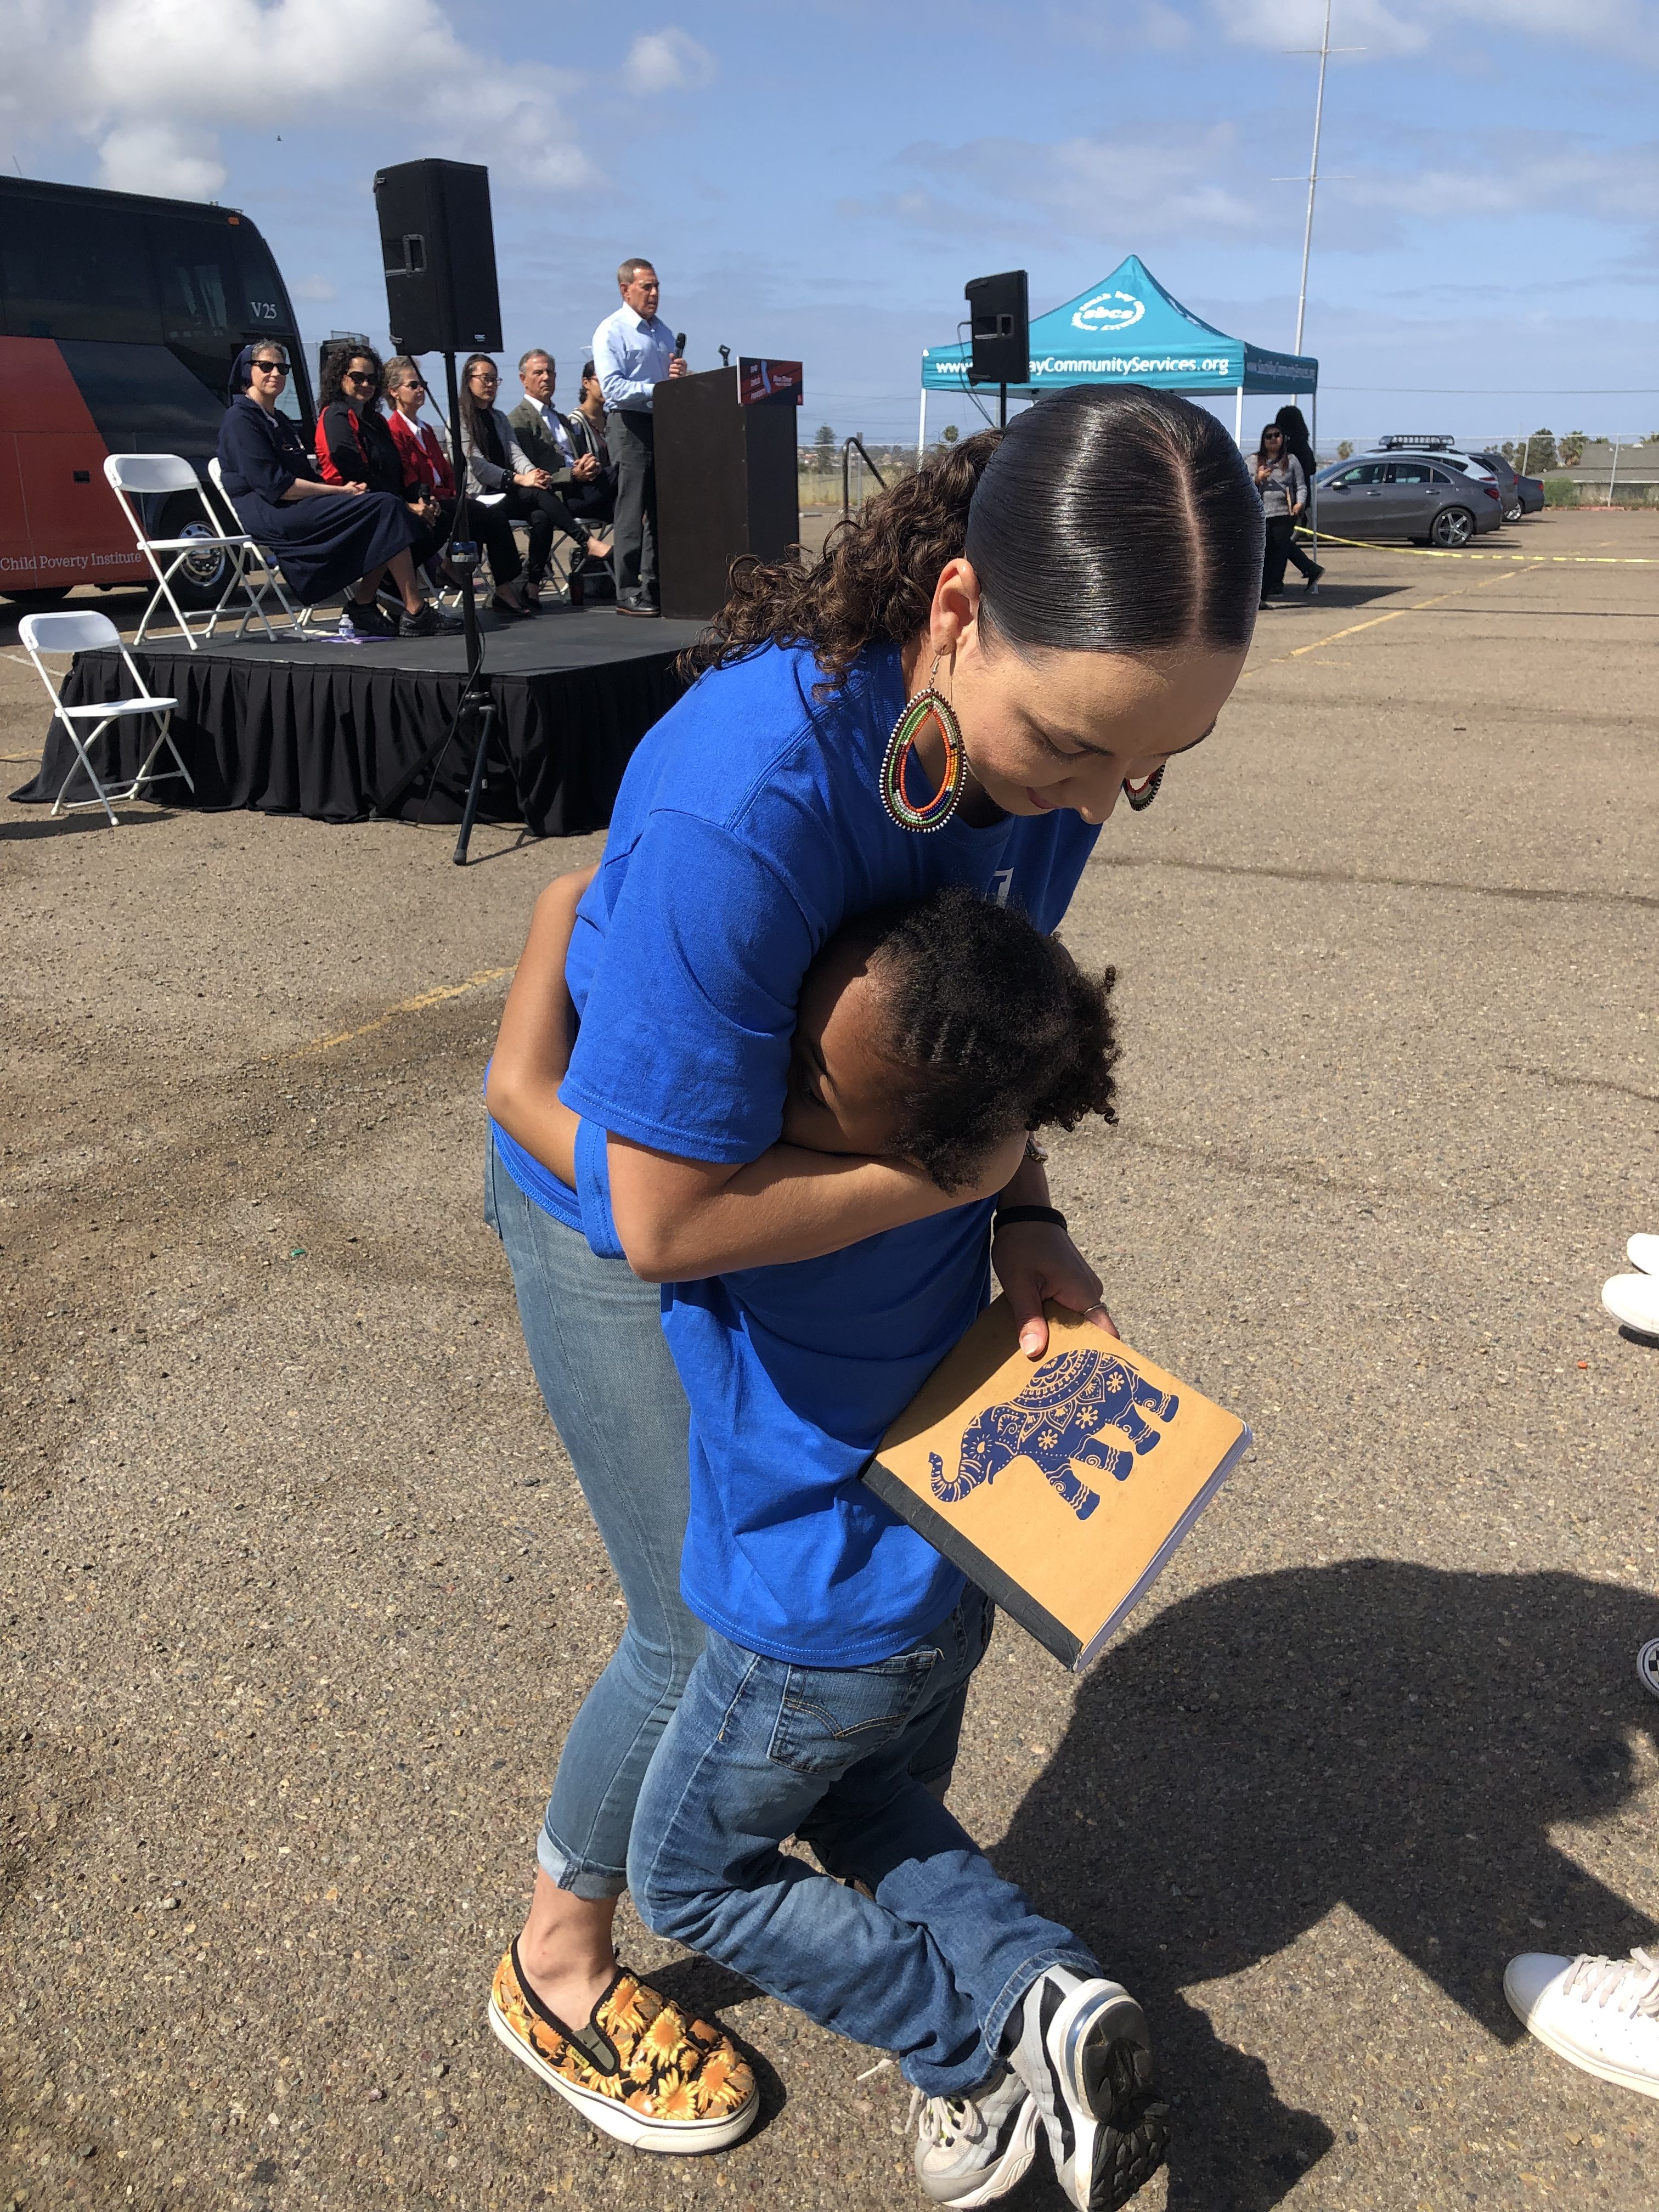 Parent Voices leader Monique gets a hug from her son Makai after speaking in Chula Vista, CA